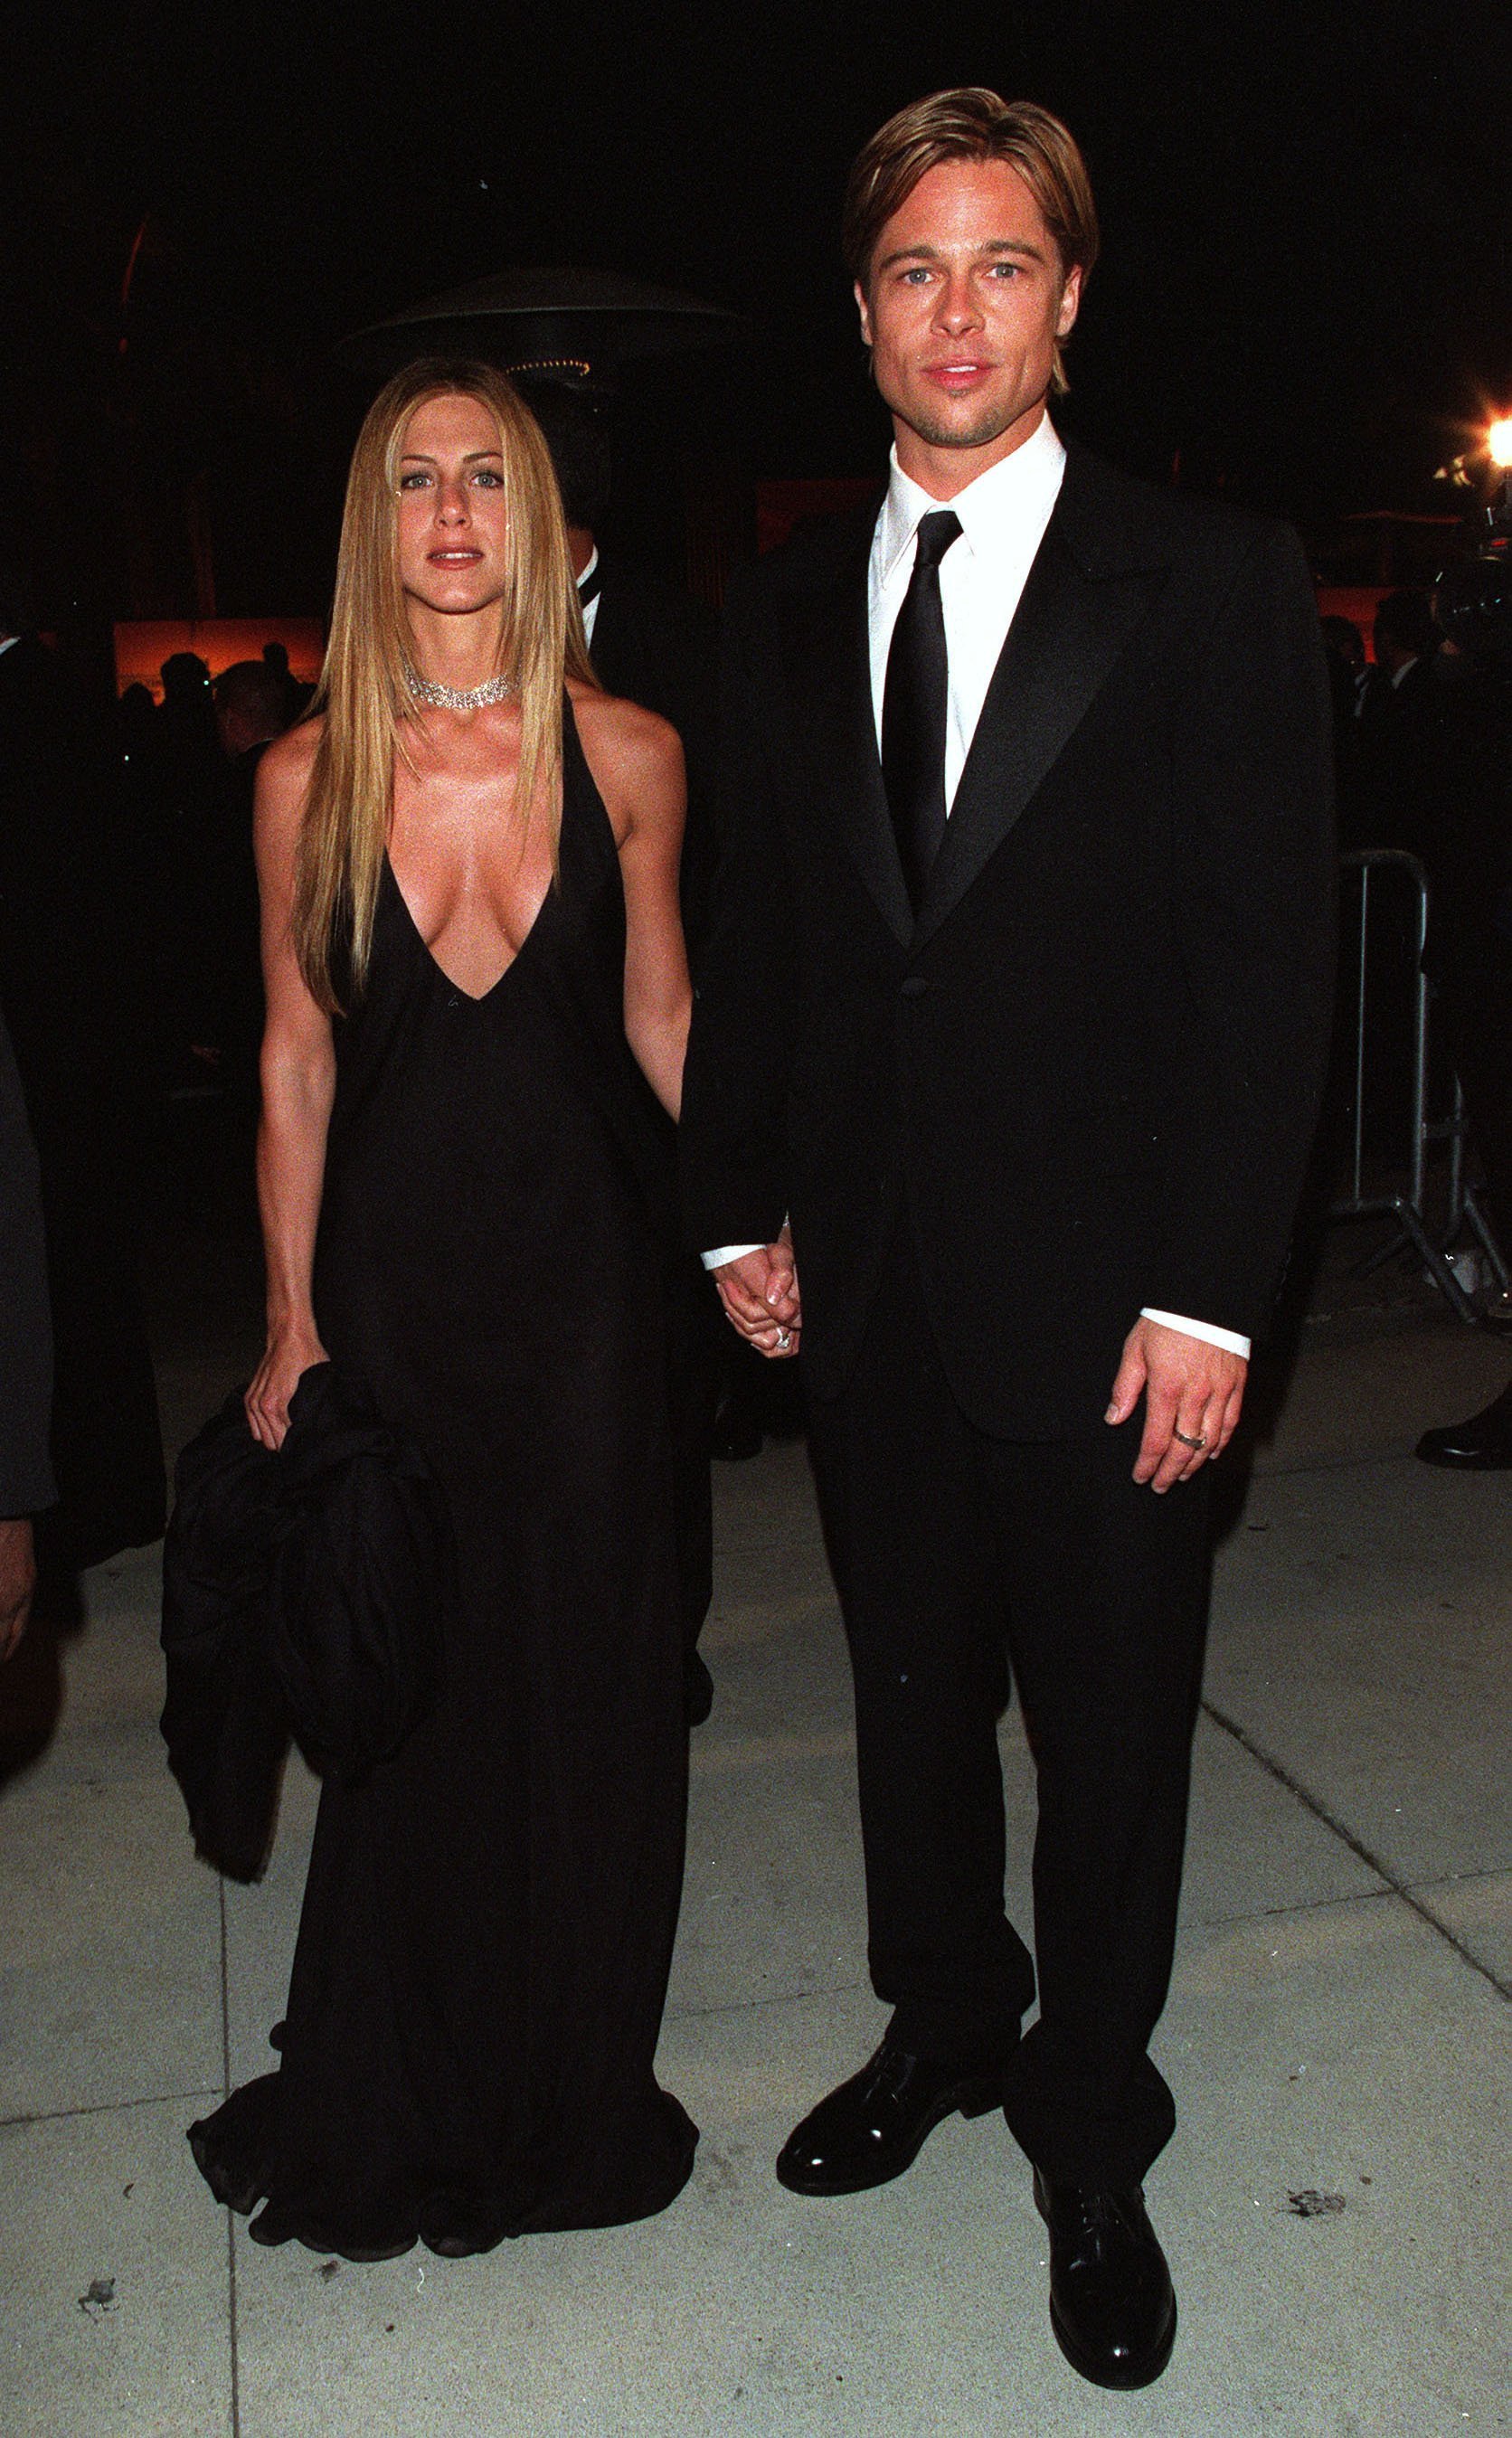 Jennifer Aniston and Brad Pitt at the Vanity Fair Party held at Morton's for the 72nd Annual Academy Awards. March 26, 2000 | Photo: Getty Images